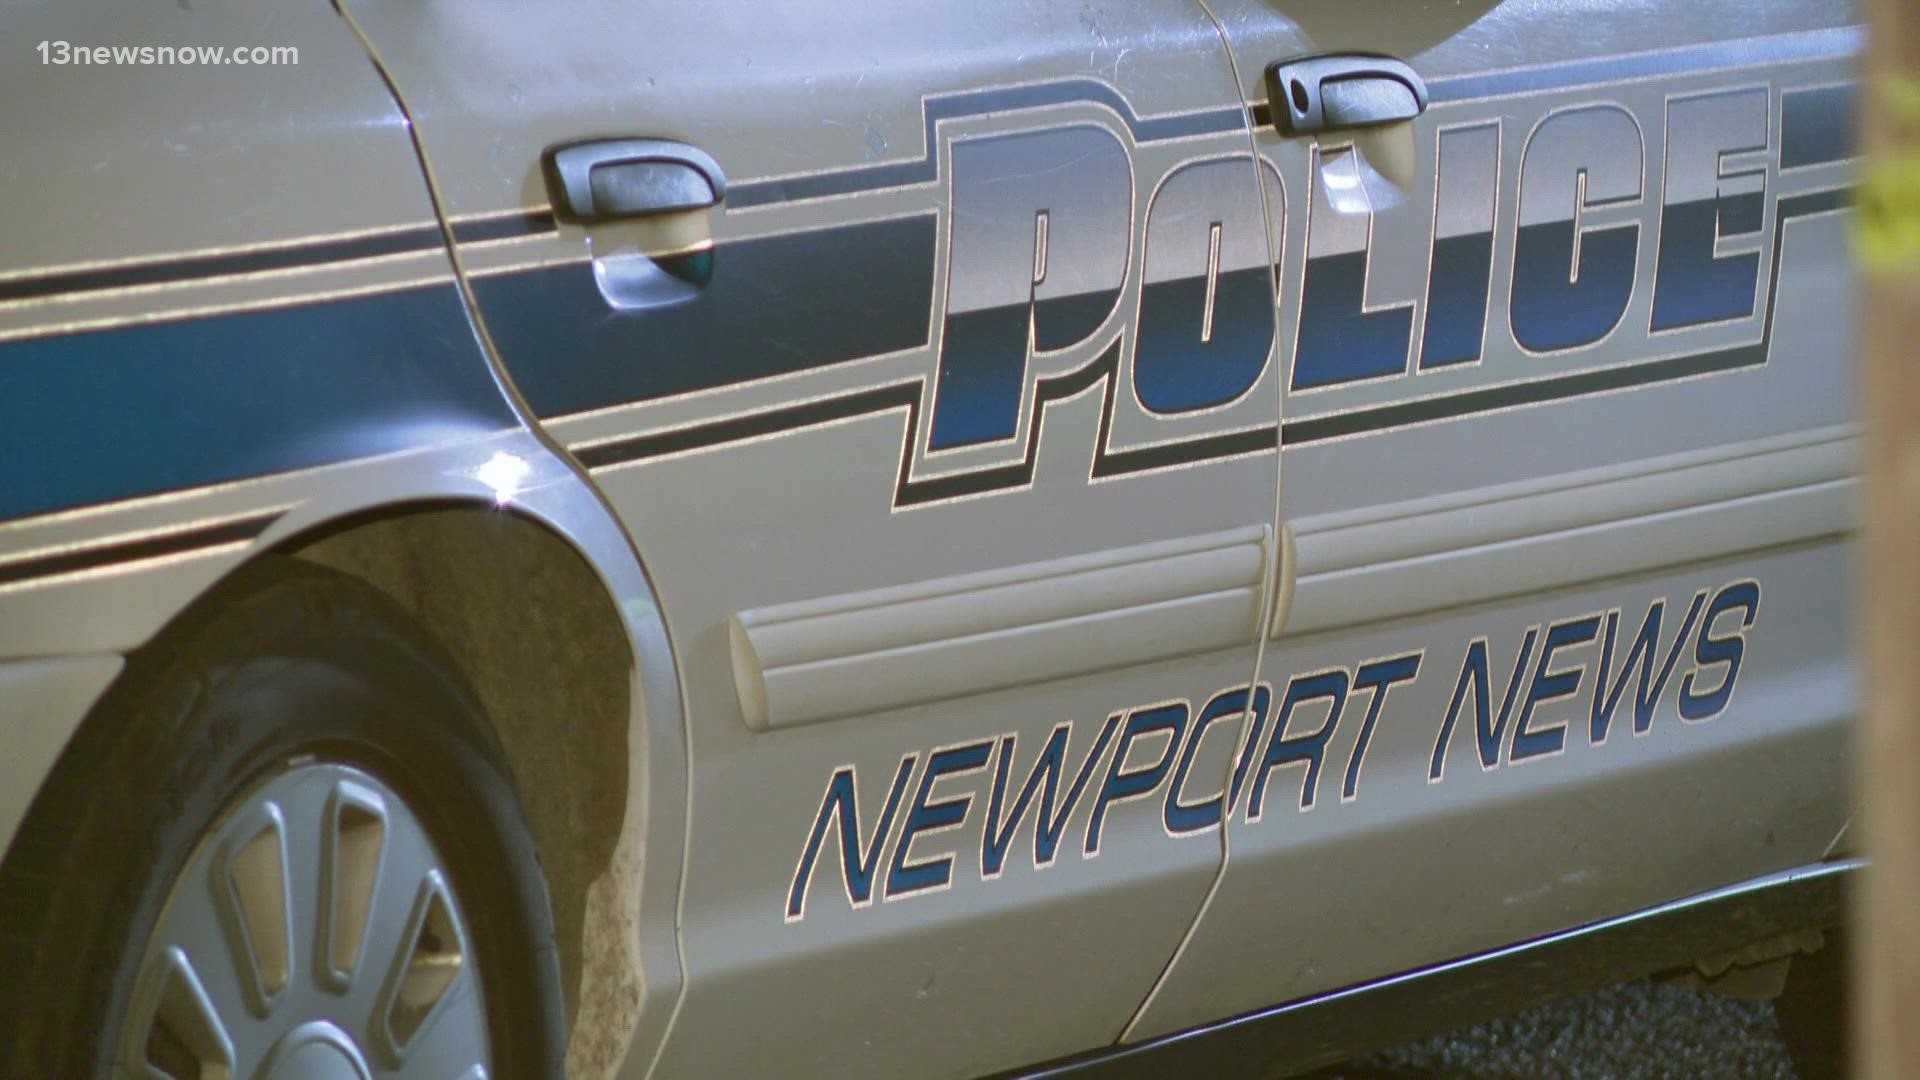 Newport News police identified 45-year-old  Rodgeric Antonio Johnson as the man who was found shot inside an apartment located in the 13200 block of Ridgeview Drive.